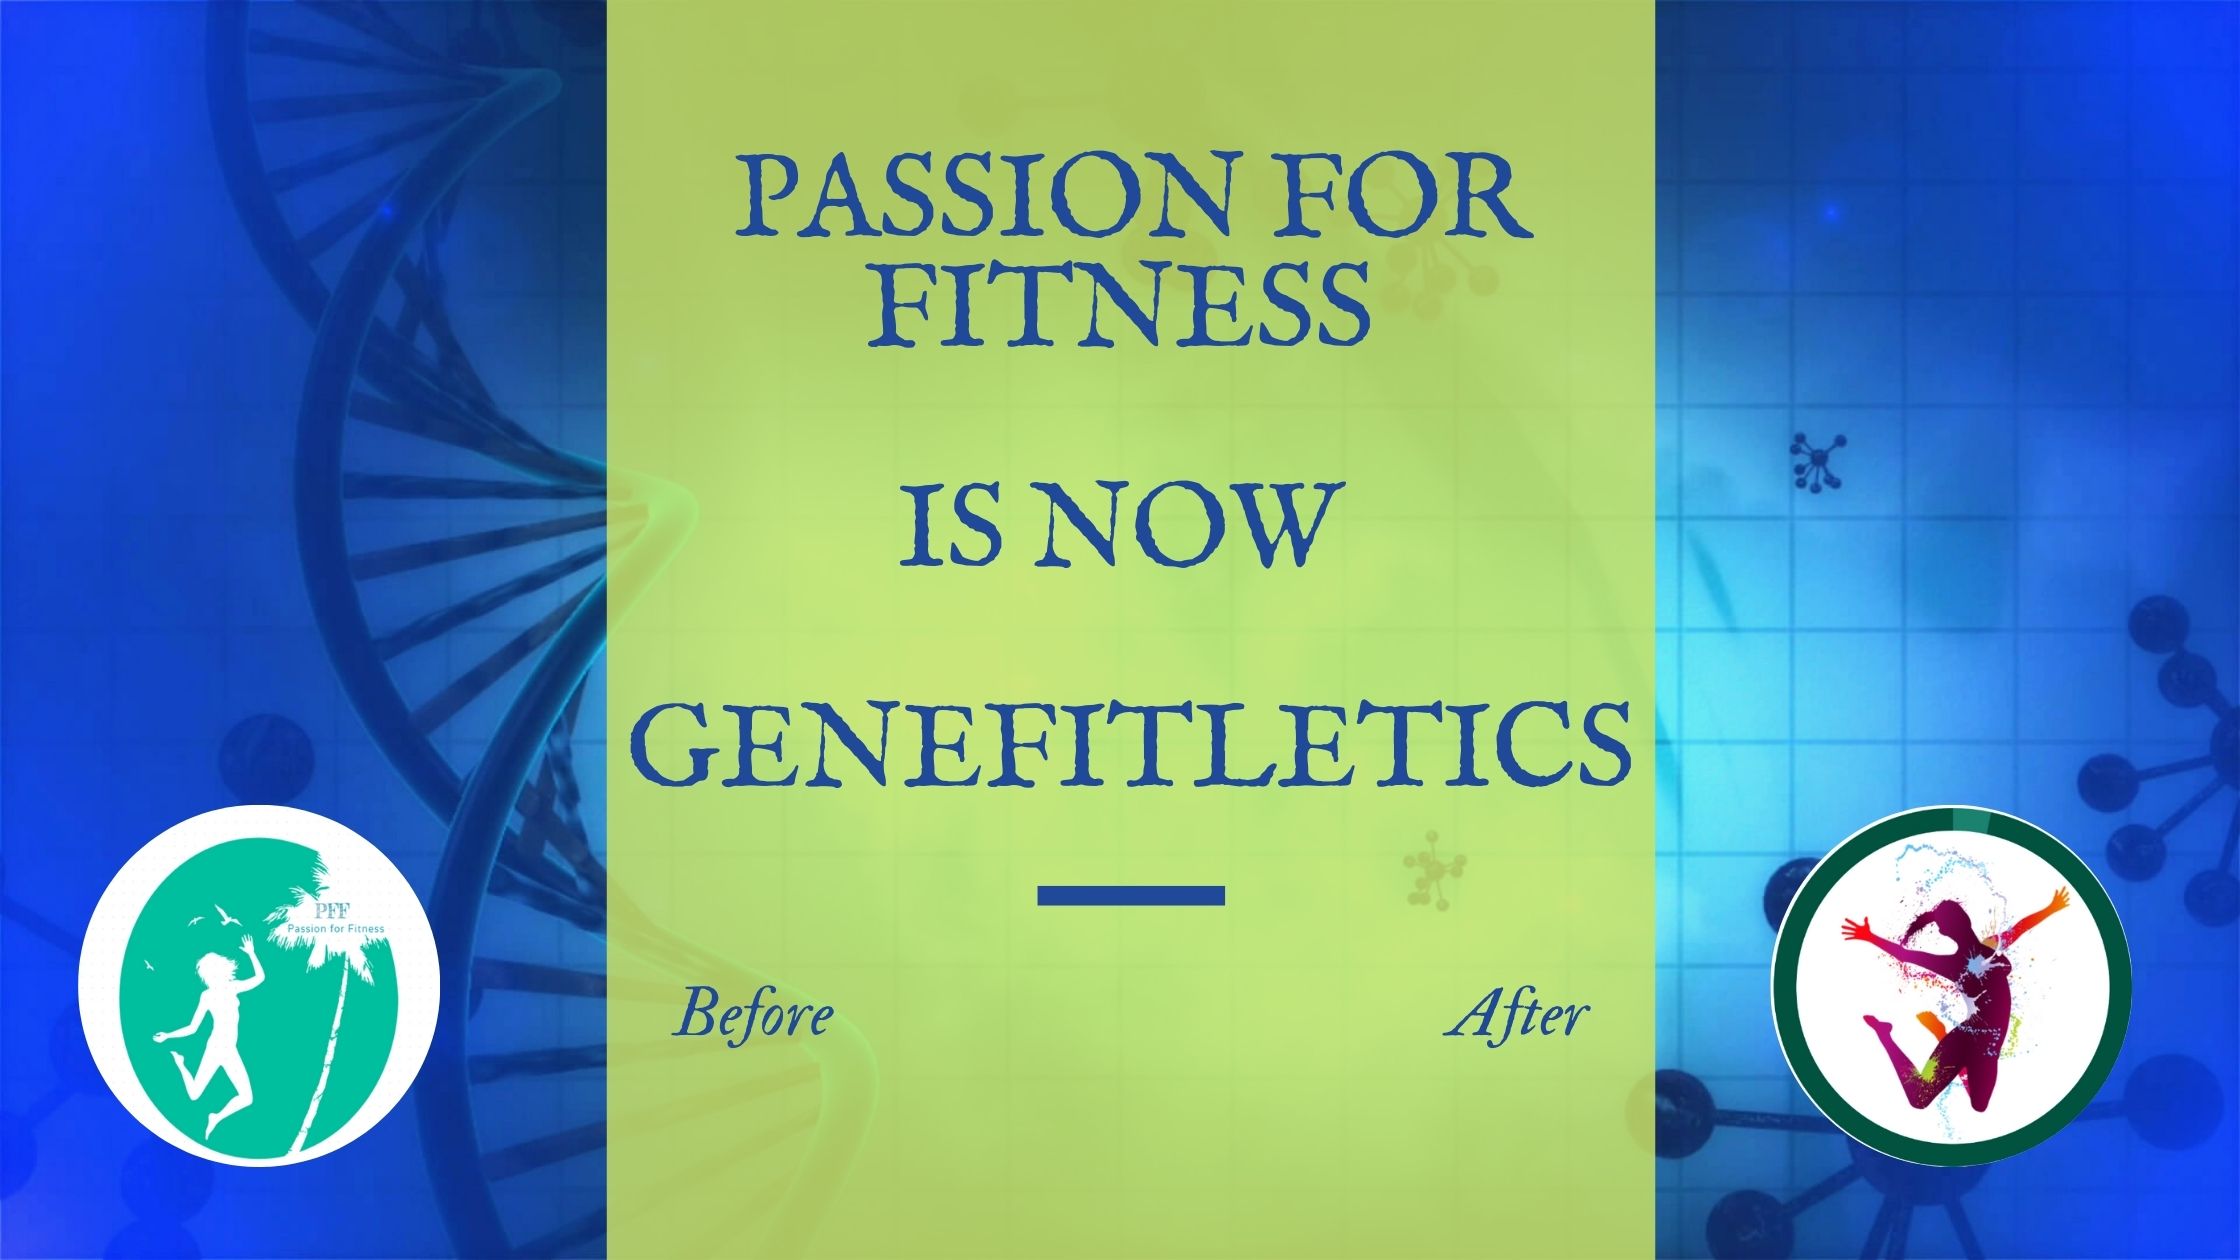 Passion for Fitness has rebranded as Genefitletics